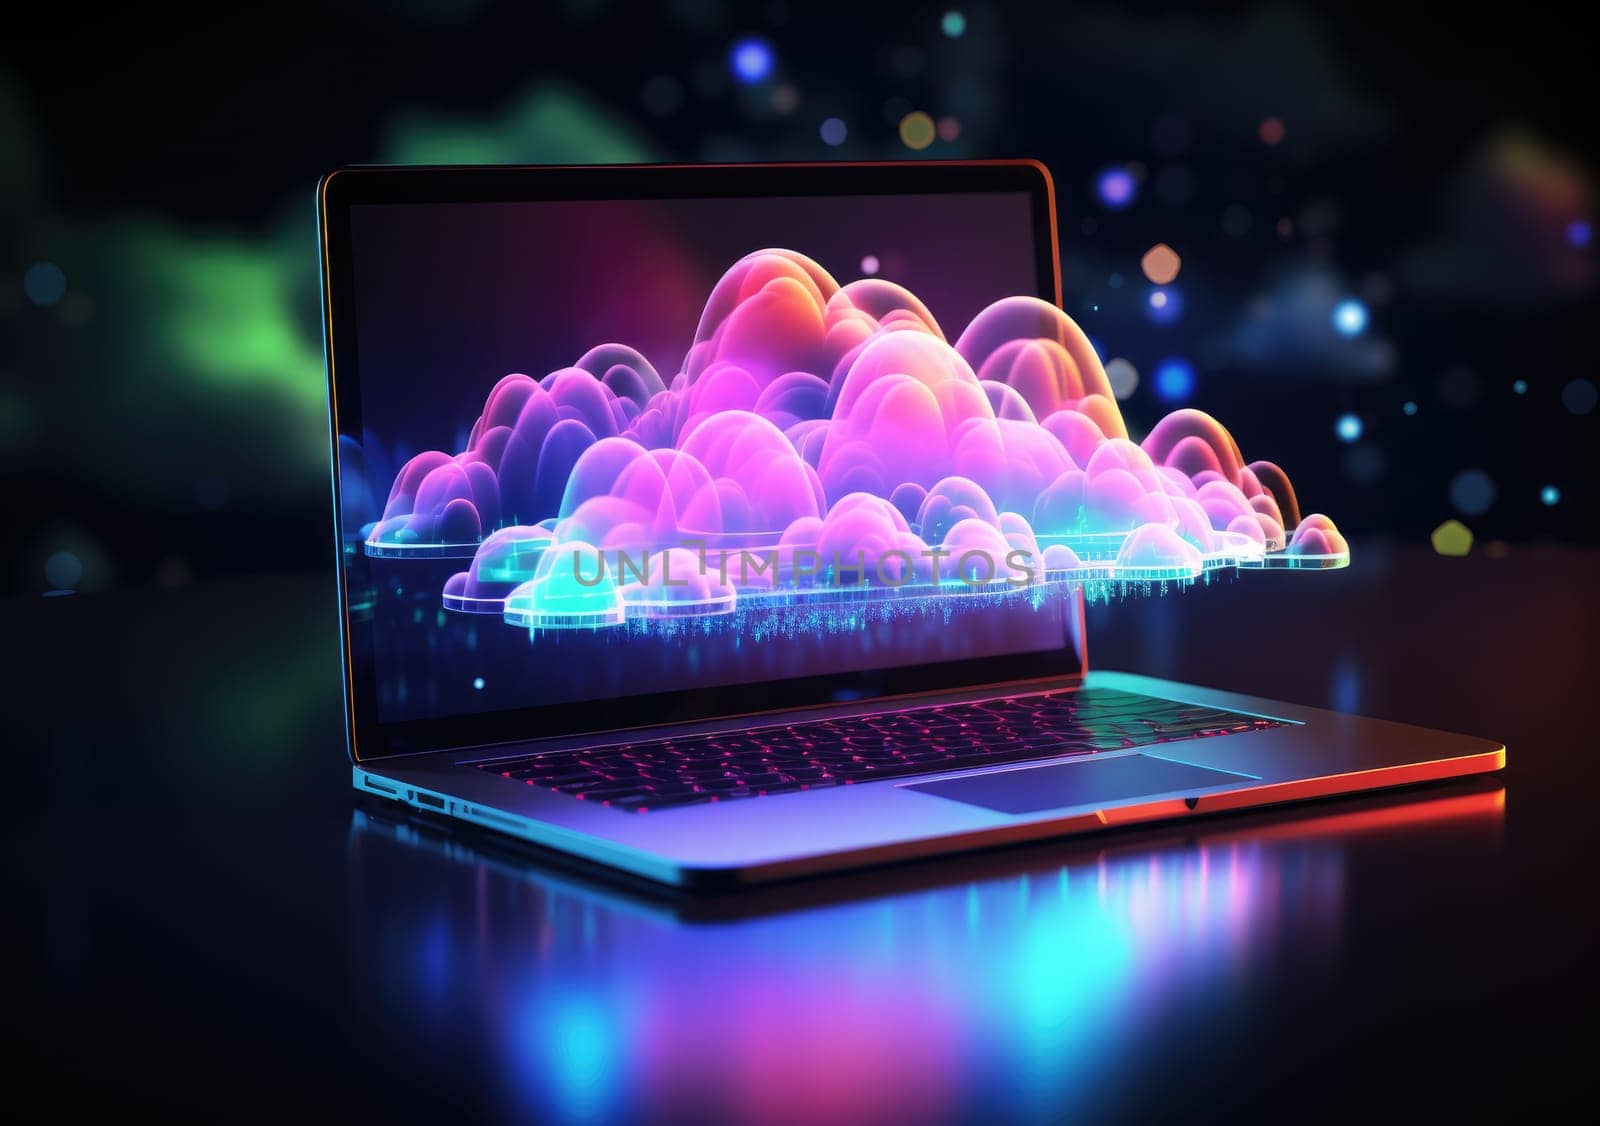 Business cloud computing: digital screen with application cloud service at neon style by PeaceYAY